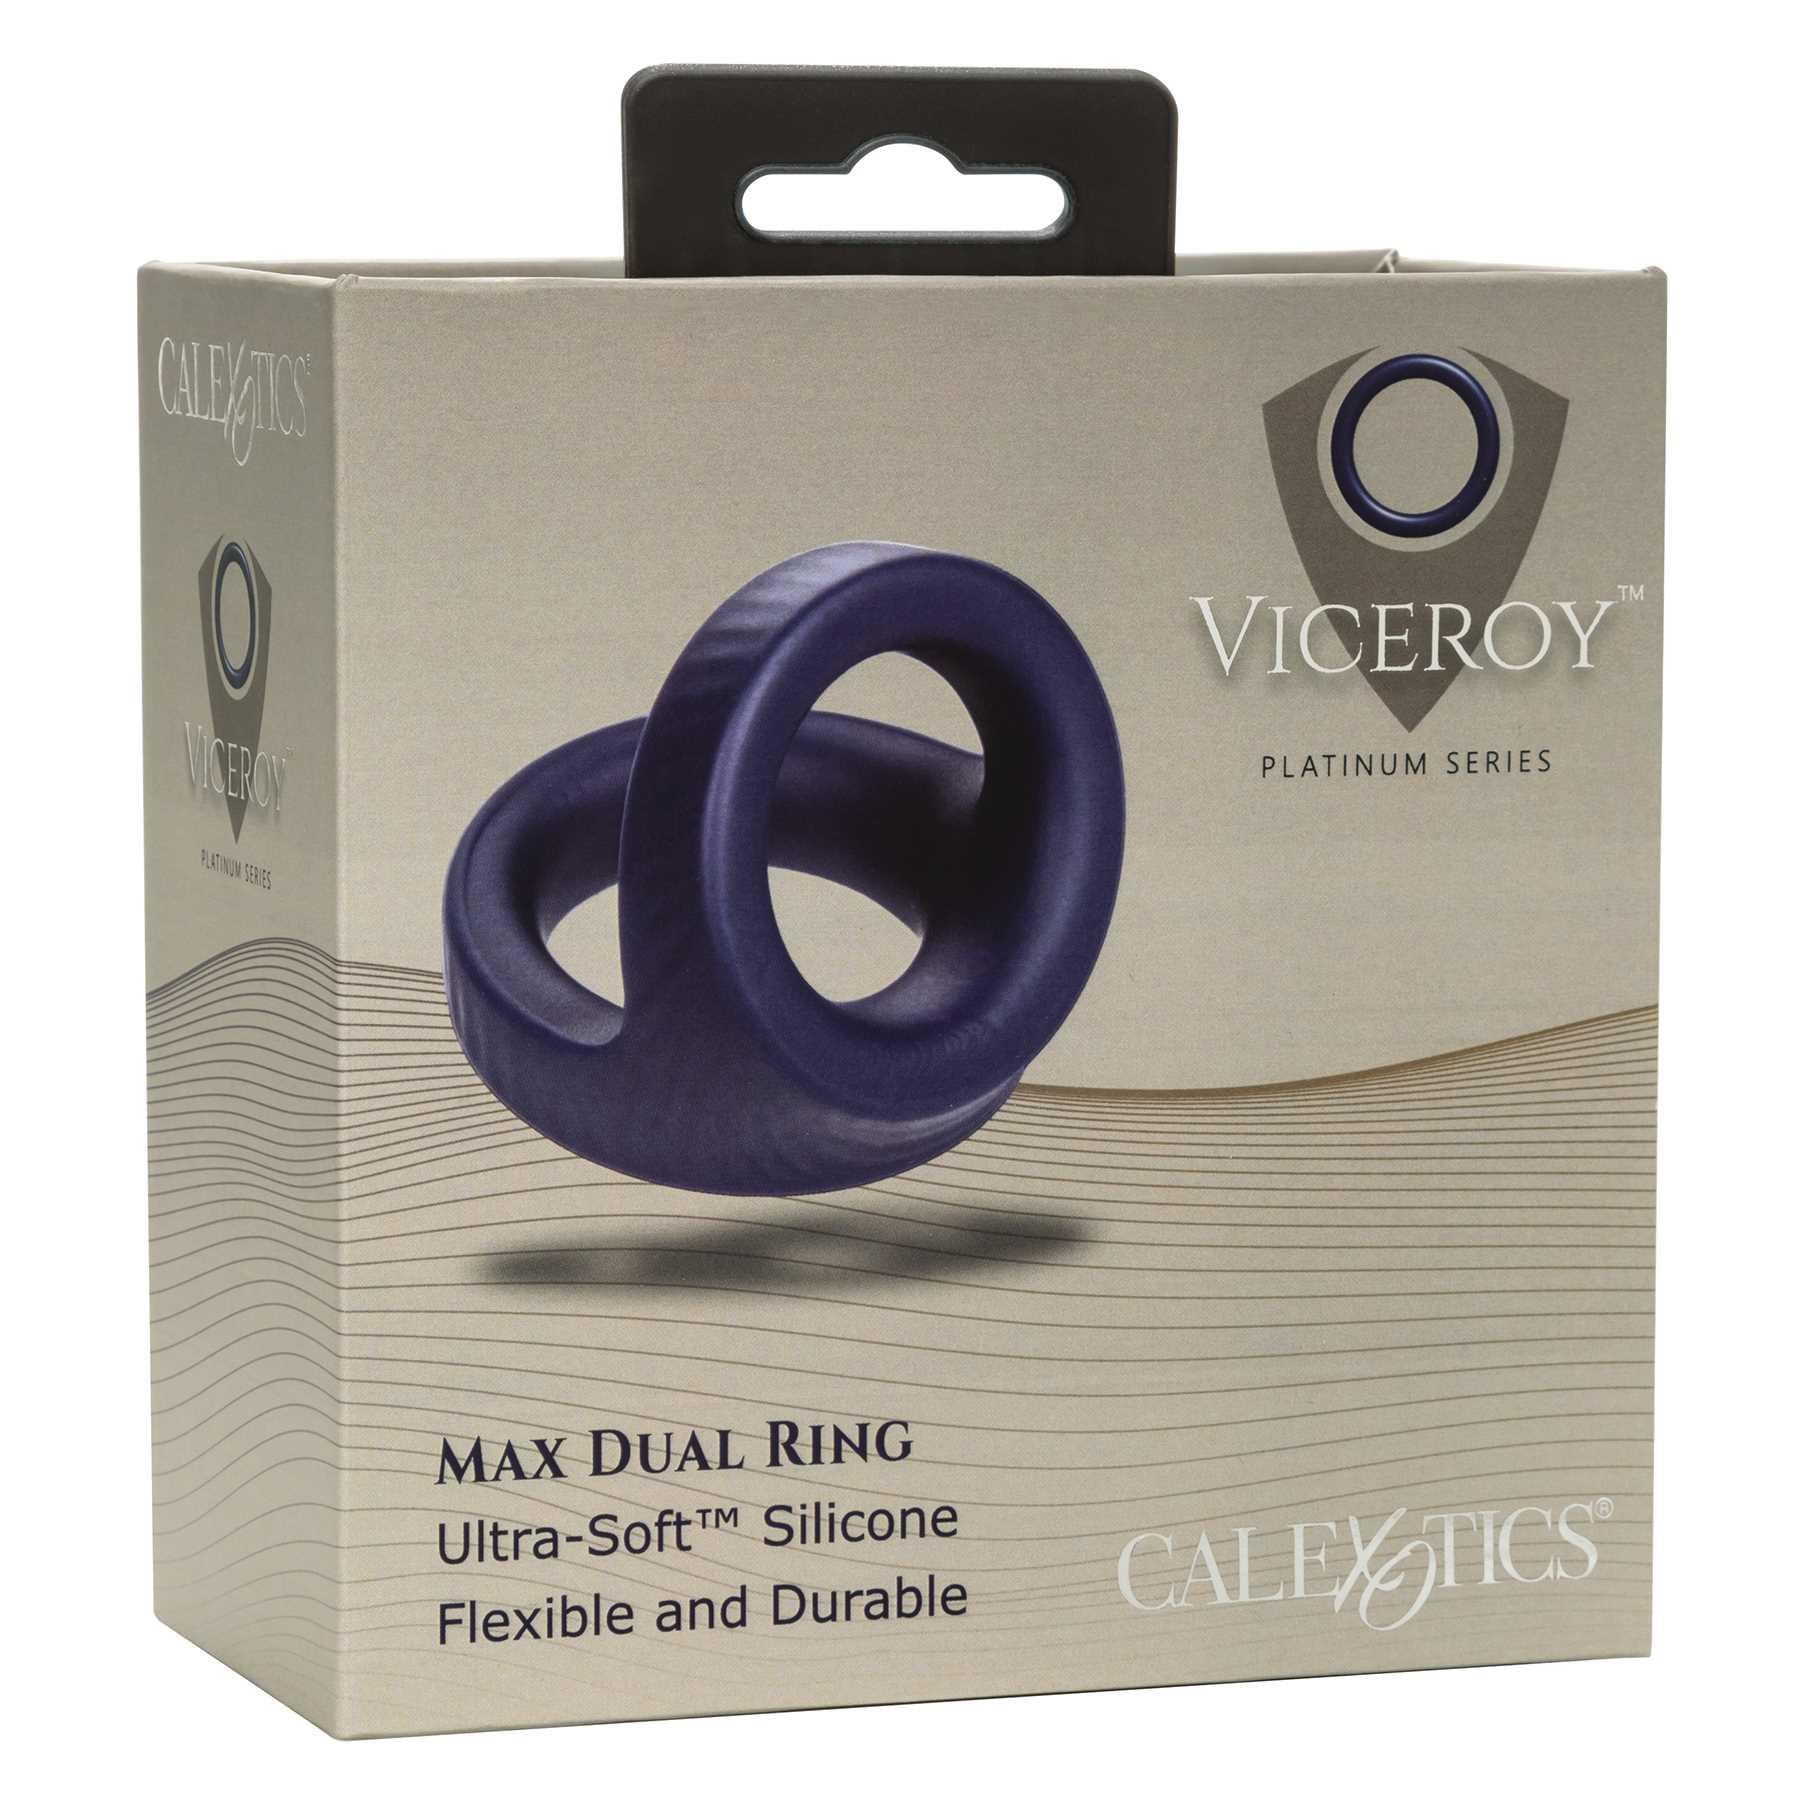 Viceroy Max Dual Ring front of box